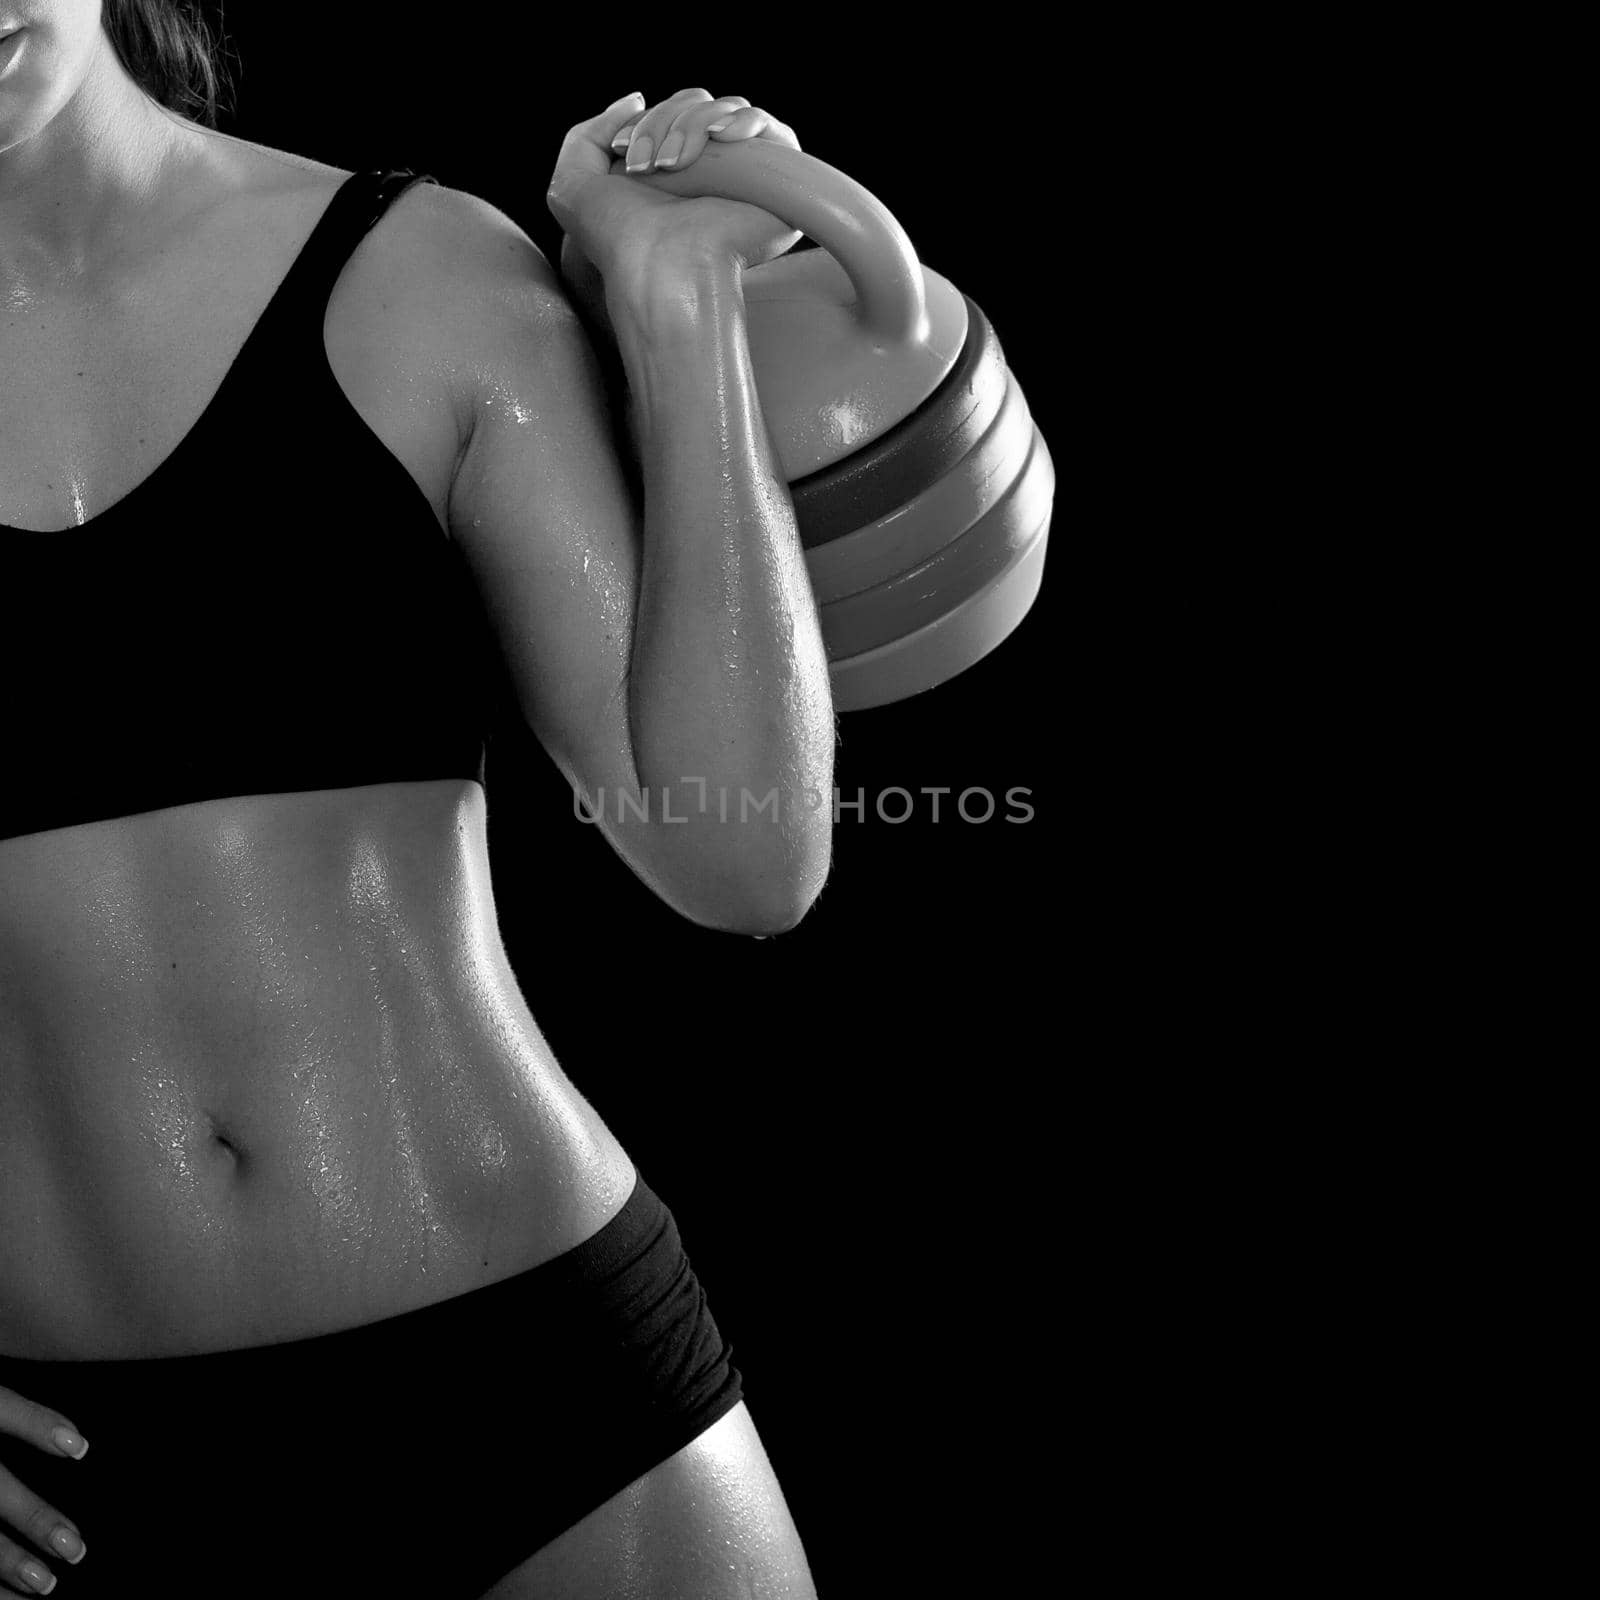 Young sporty girl with muscular body in black lingerie with the sweat on the skin does exercise standing with weights on a black background. Black and white photography.